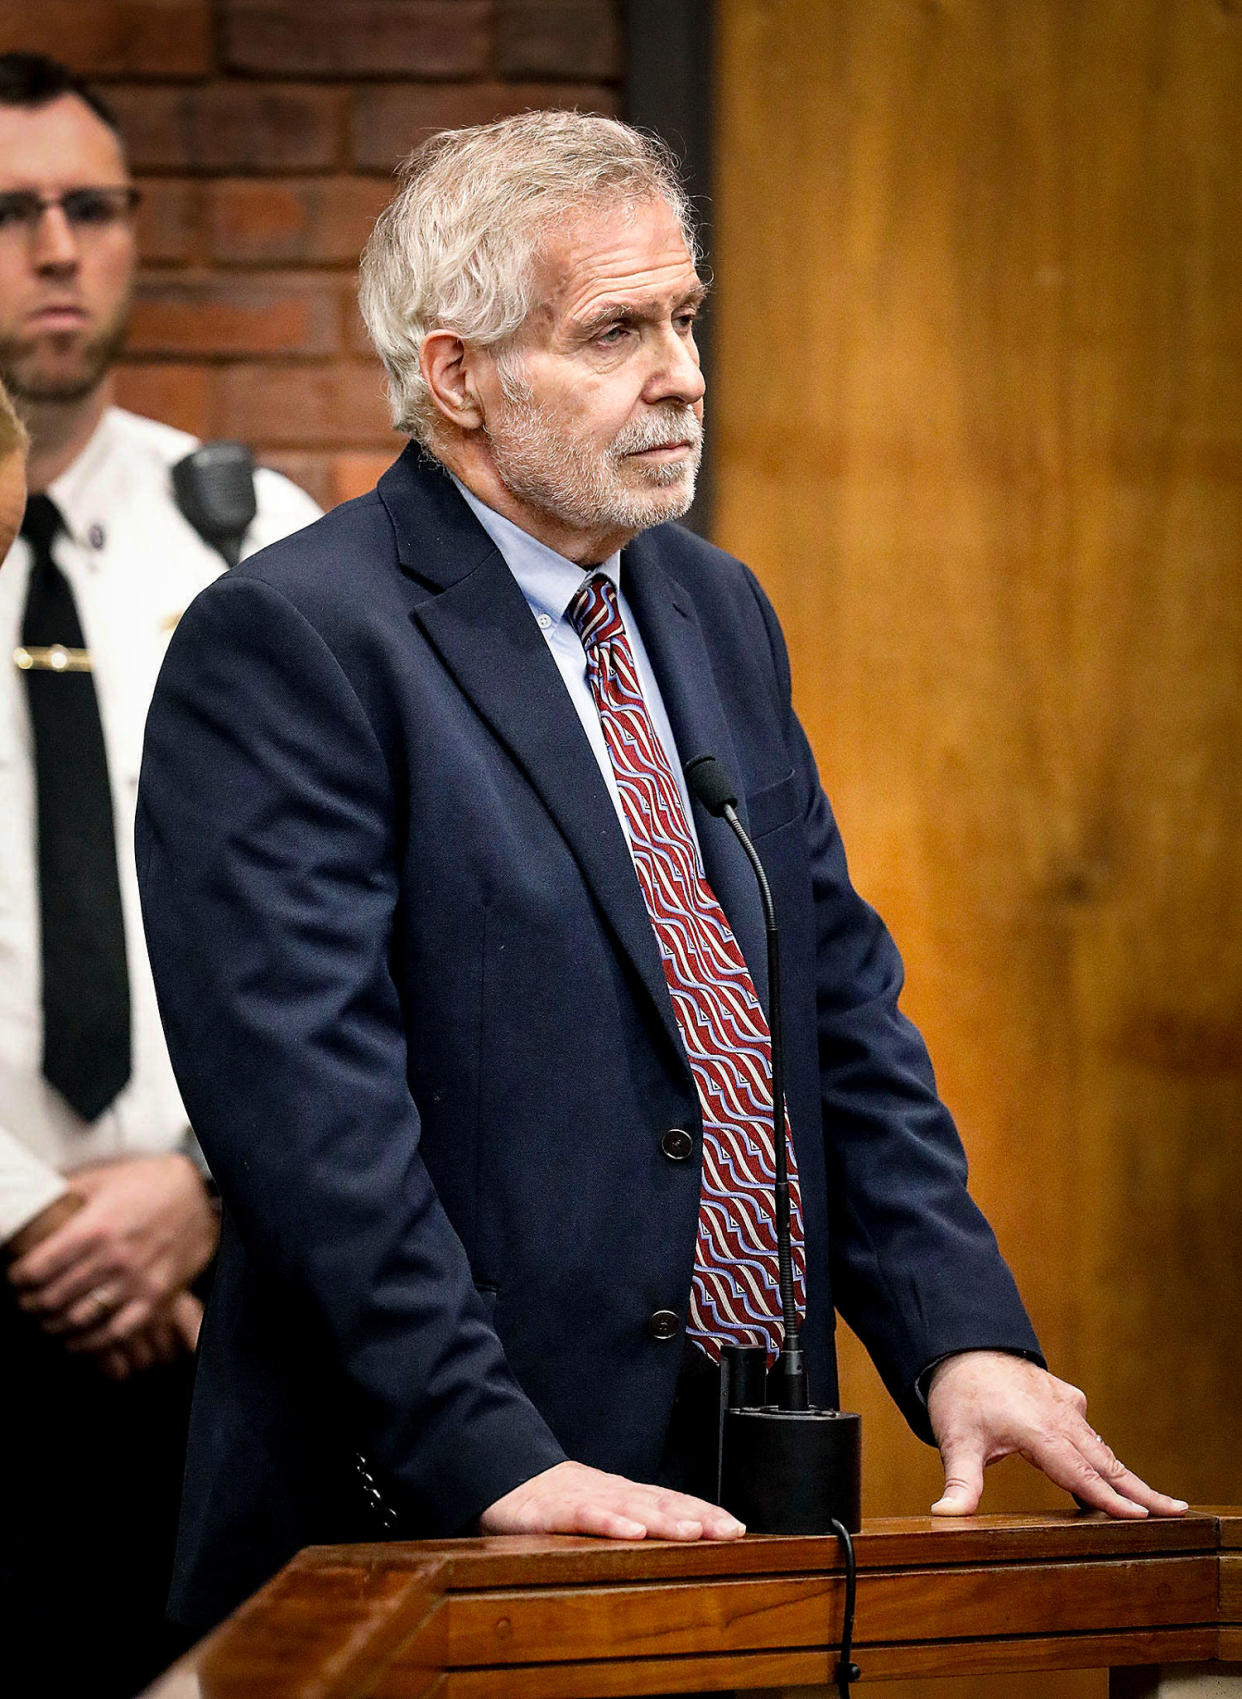 Norwell pediatrician Dr. Richard Kauff is arraigned in Hingham District Court  (Greg Derr / The Patriot Ledger via USA Today Network)